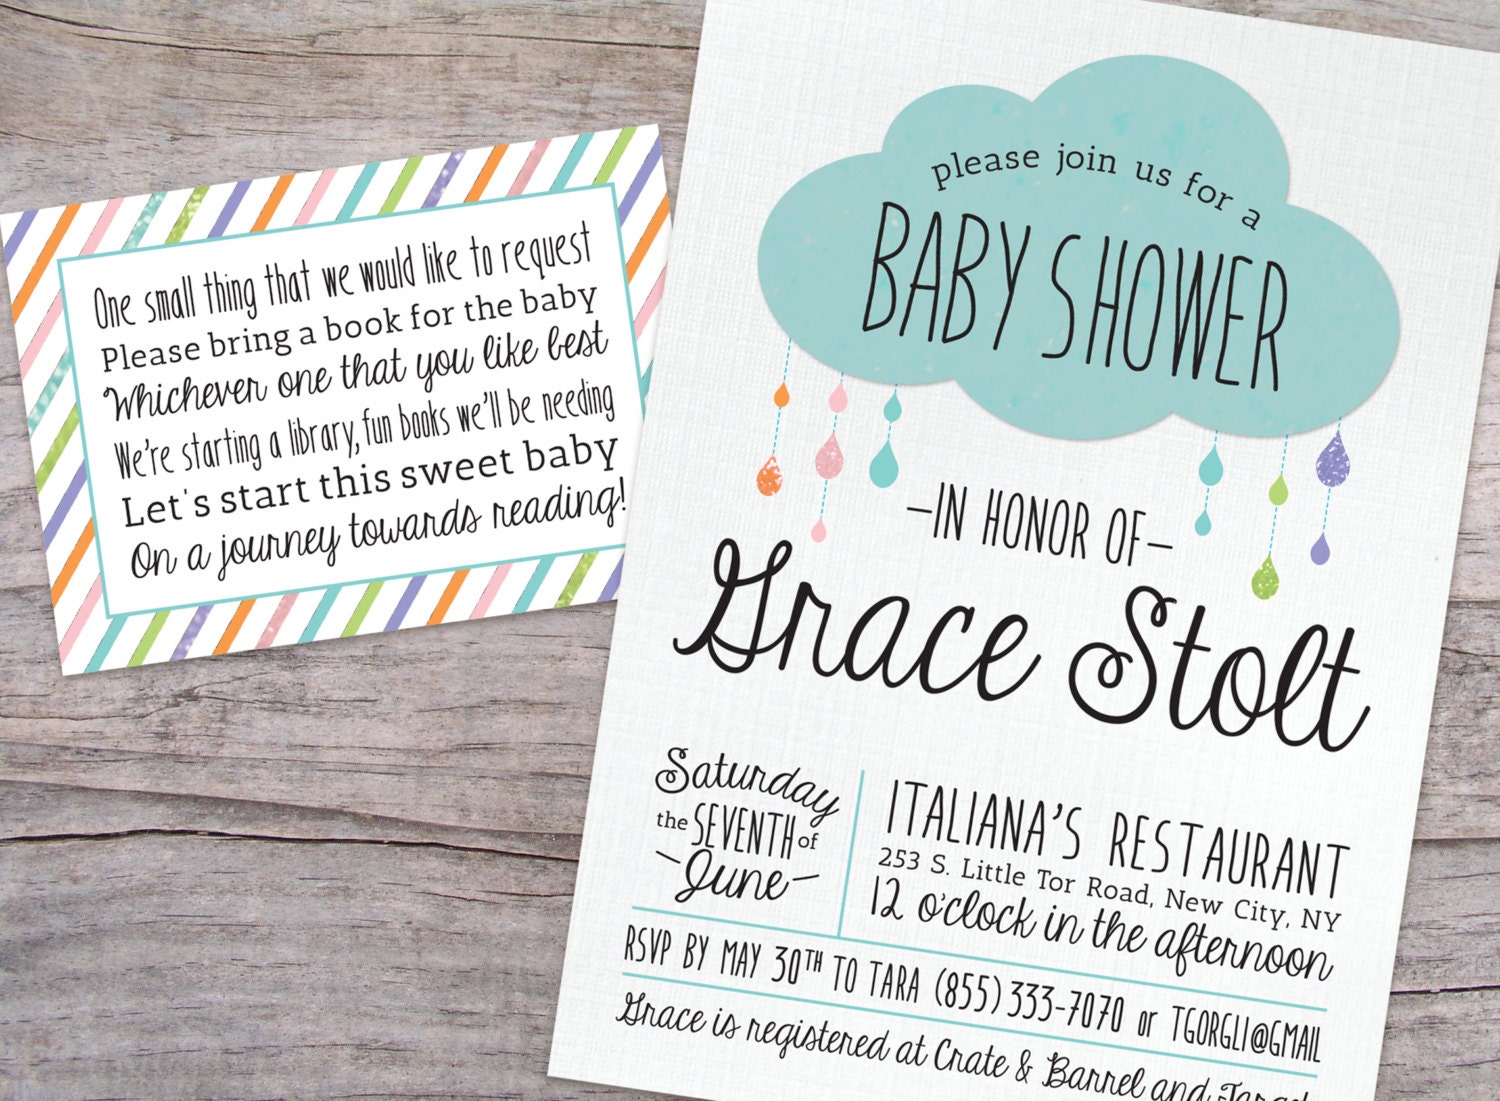 How To Ask For Gifts On A Baby Shower Invitation